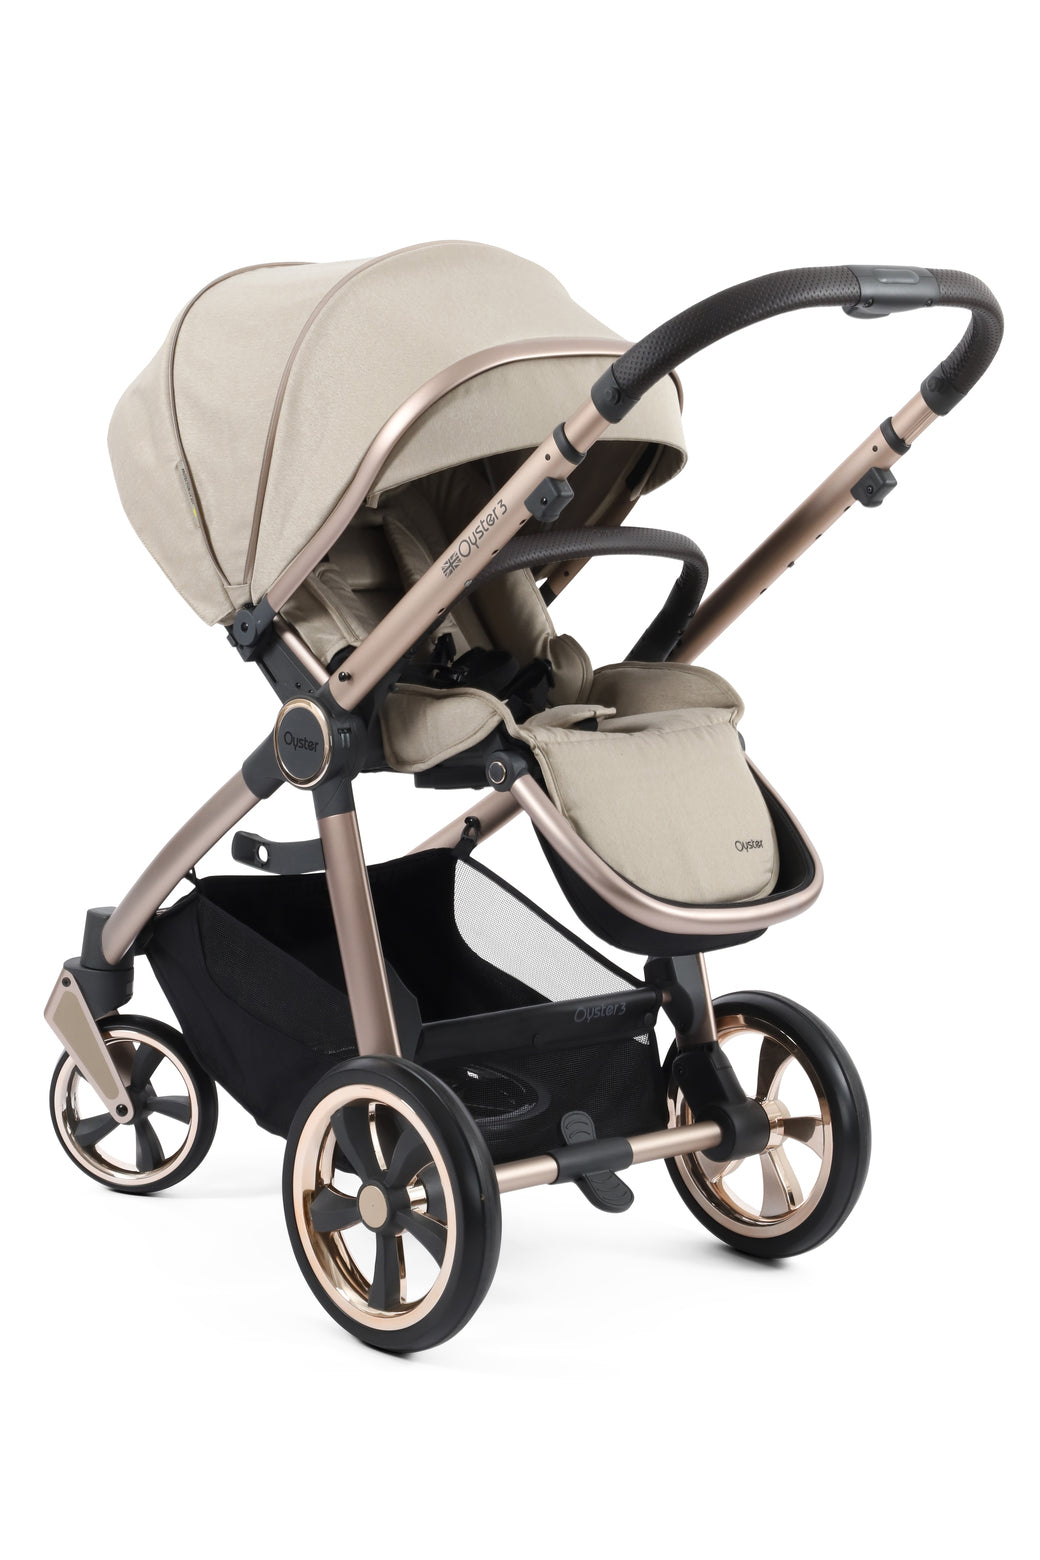 Babystyle Oyster 3 Pushchair - Creme Brulee - For Your Little One